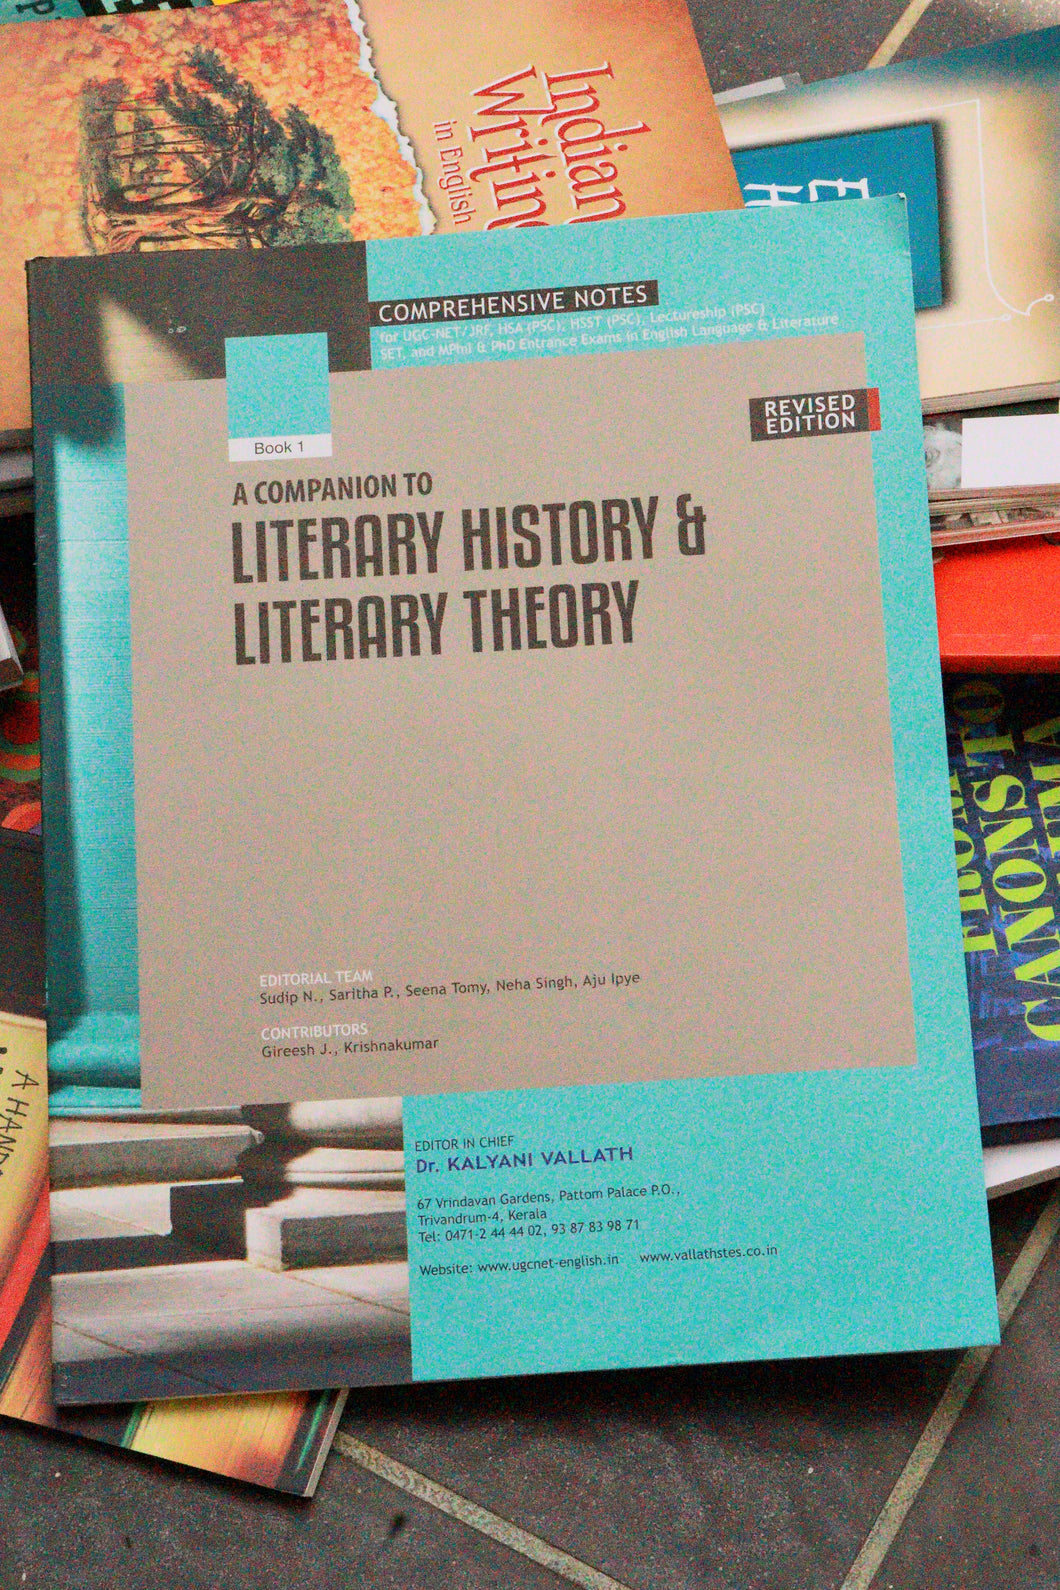 Book 1 - A Companion to Literary History and Literary Theory